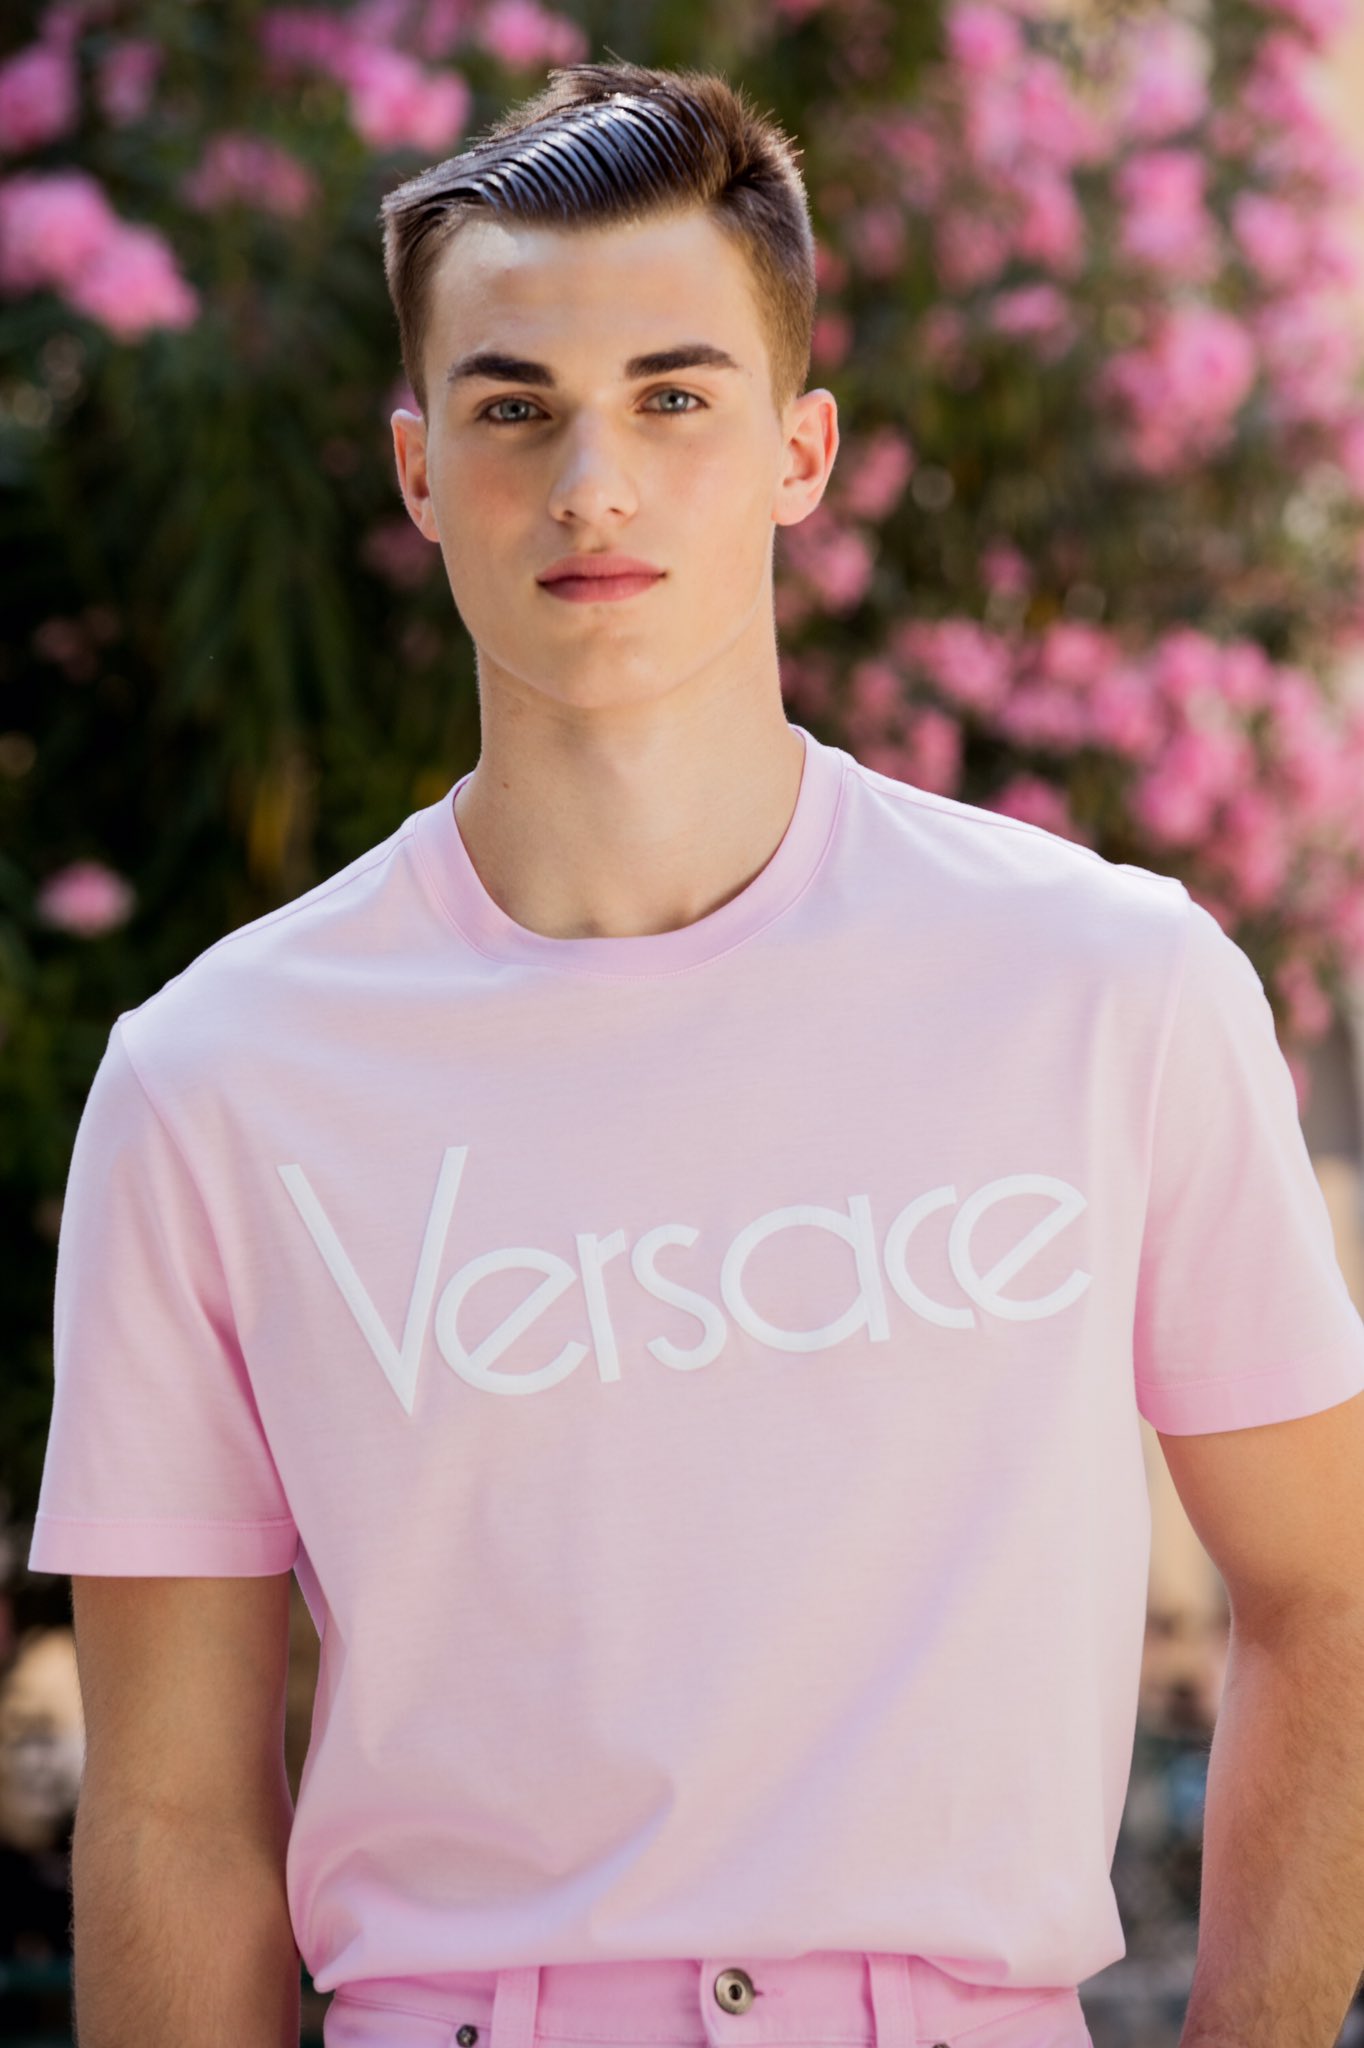 Postbud kløft længst VERSACE on Twitter: "A classic #Versace logo looks totally new, embroidered  in white stitches on a pale pink T-shirt. #VersaceSS18 #MFW https://t.co/GVmIfadrbi  https://t.co/uhqGsUuMGU" / X